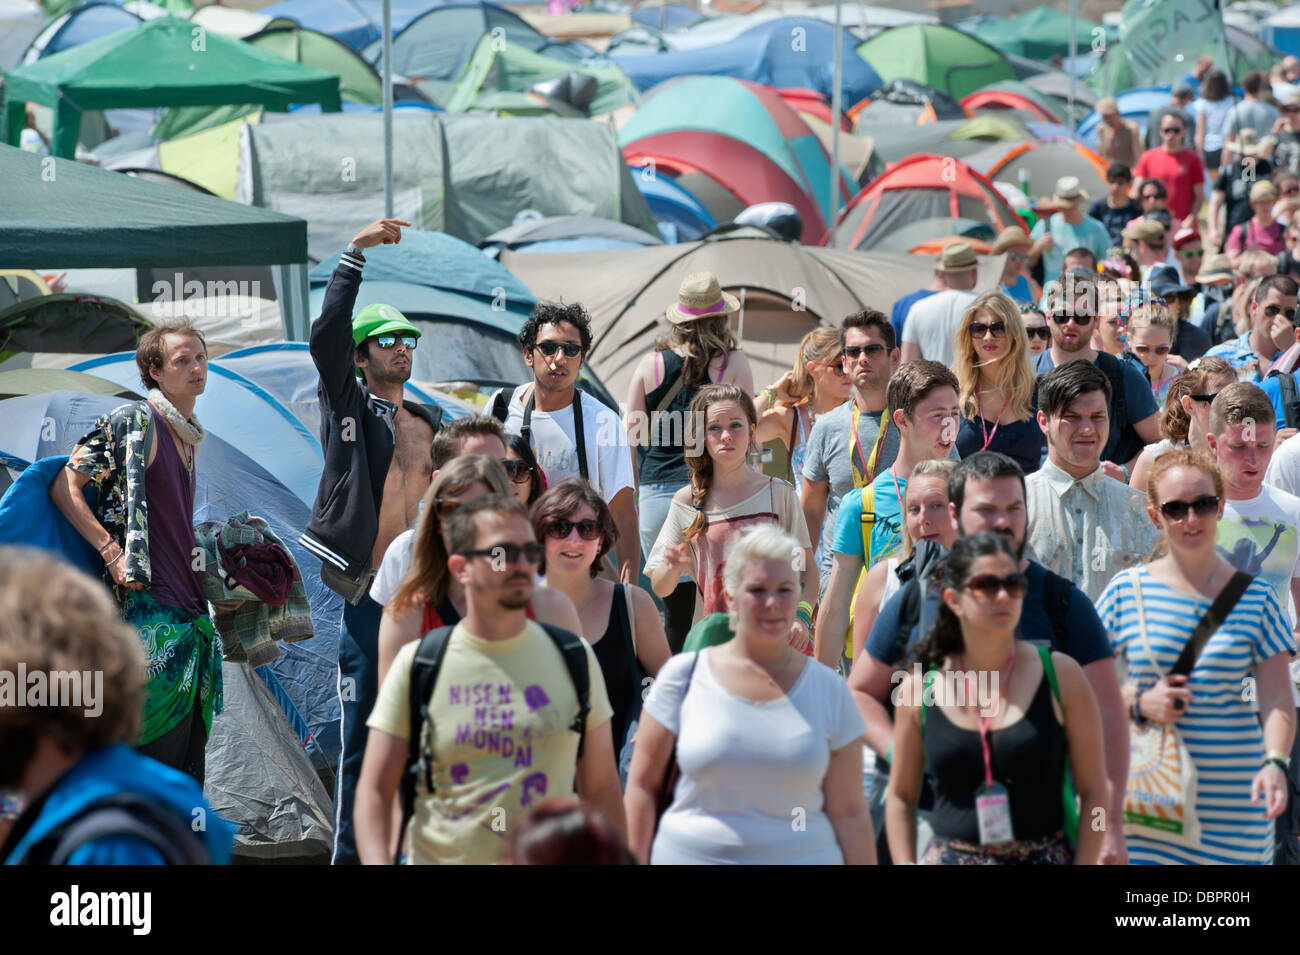 Glastonbury Festival 2013 UK - Campers walk to the main arenas surrounded by tents in the Pennard Hill Ground campsite Stock Photo